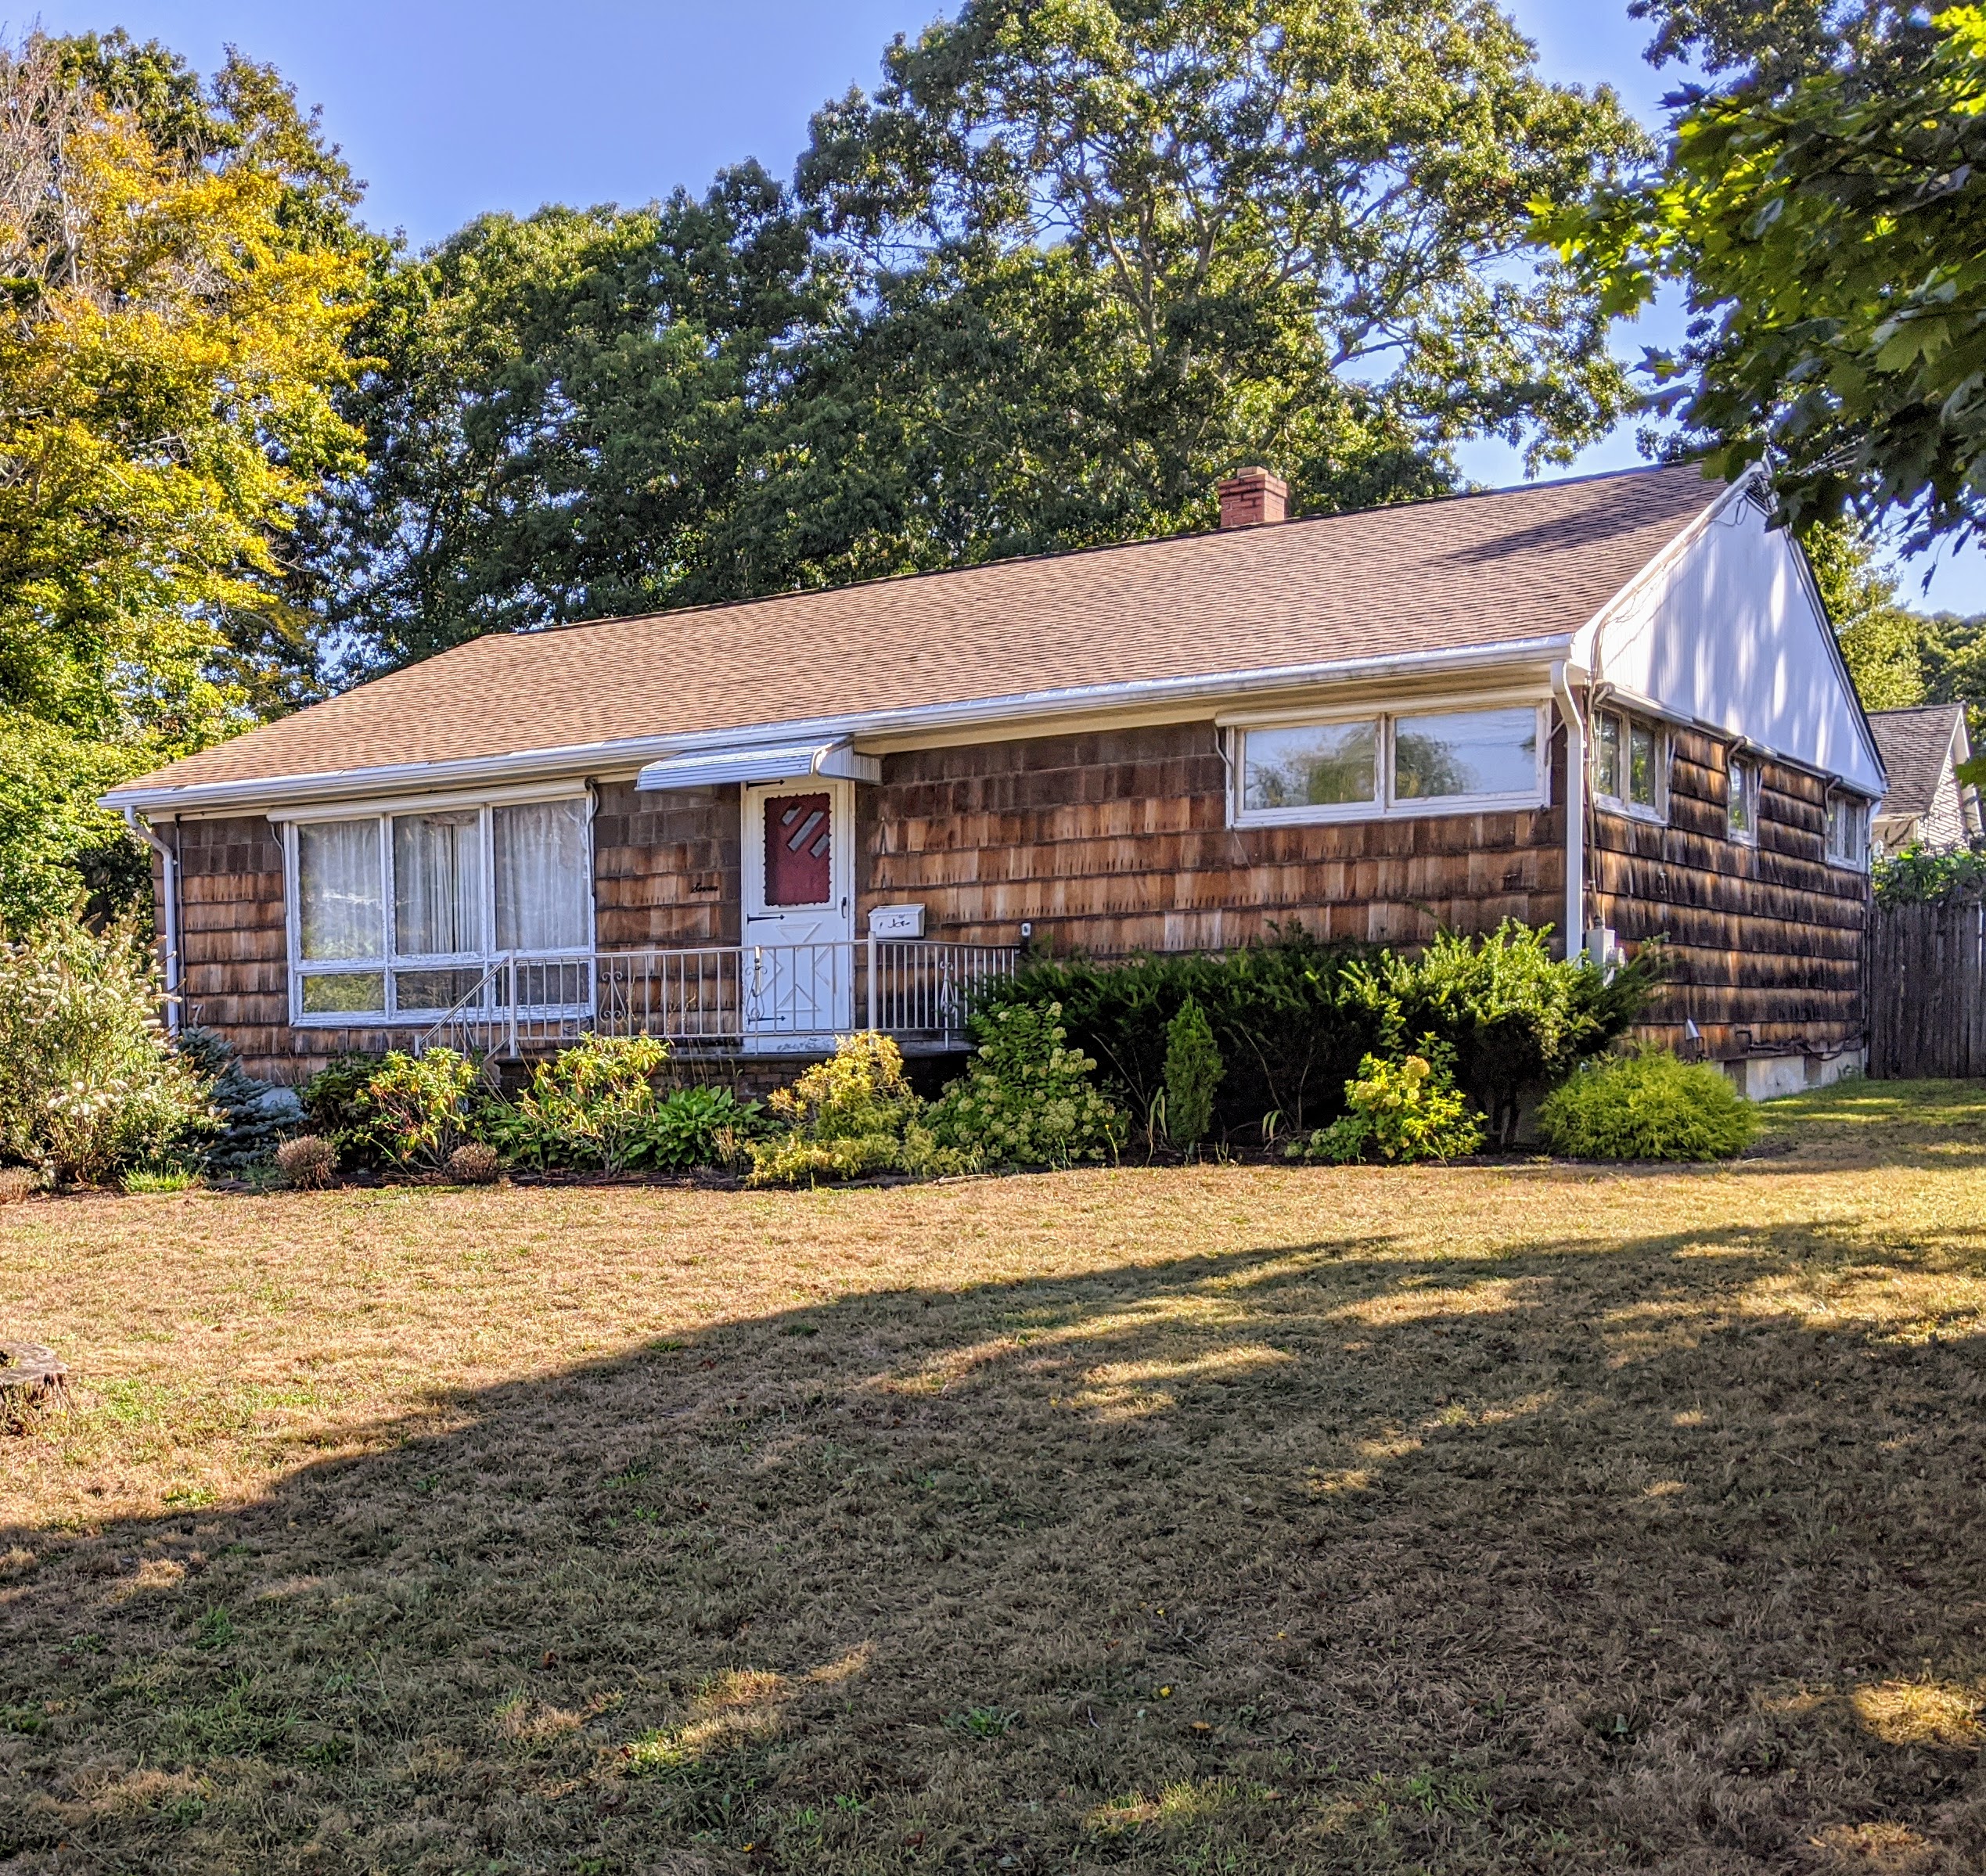 Westerly eXp Realty Realtor Bridget Morrissey sold 7 Midland Road in Westerly RI